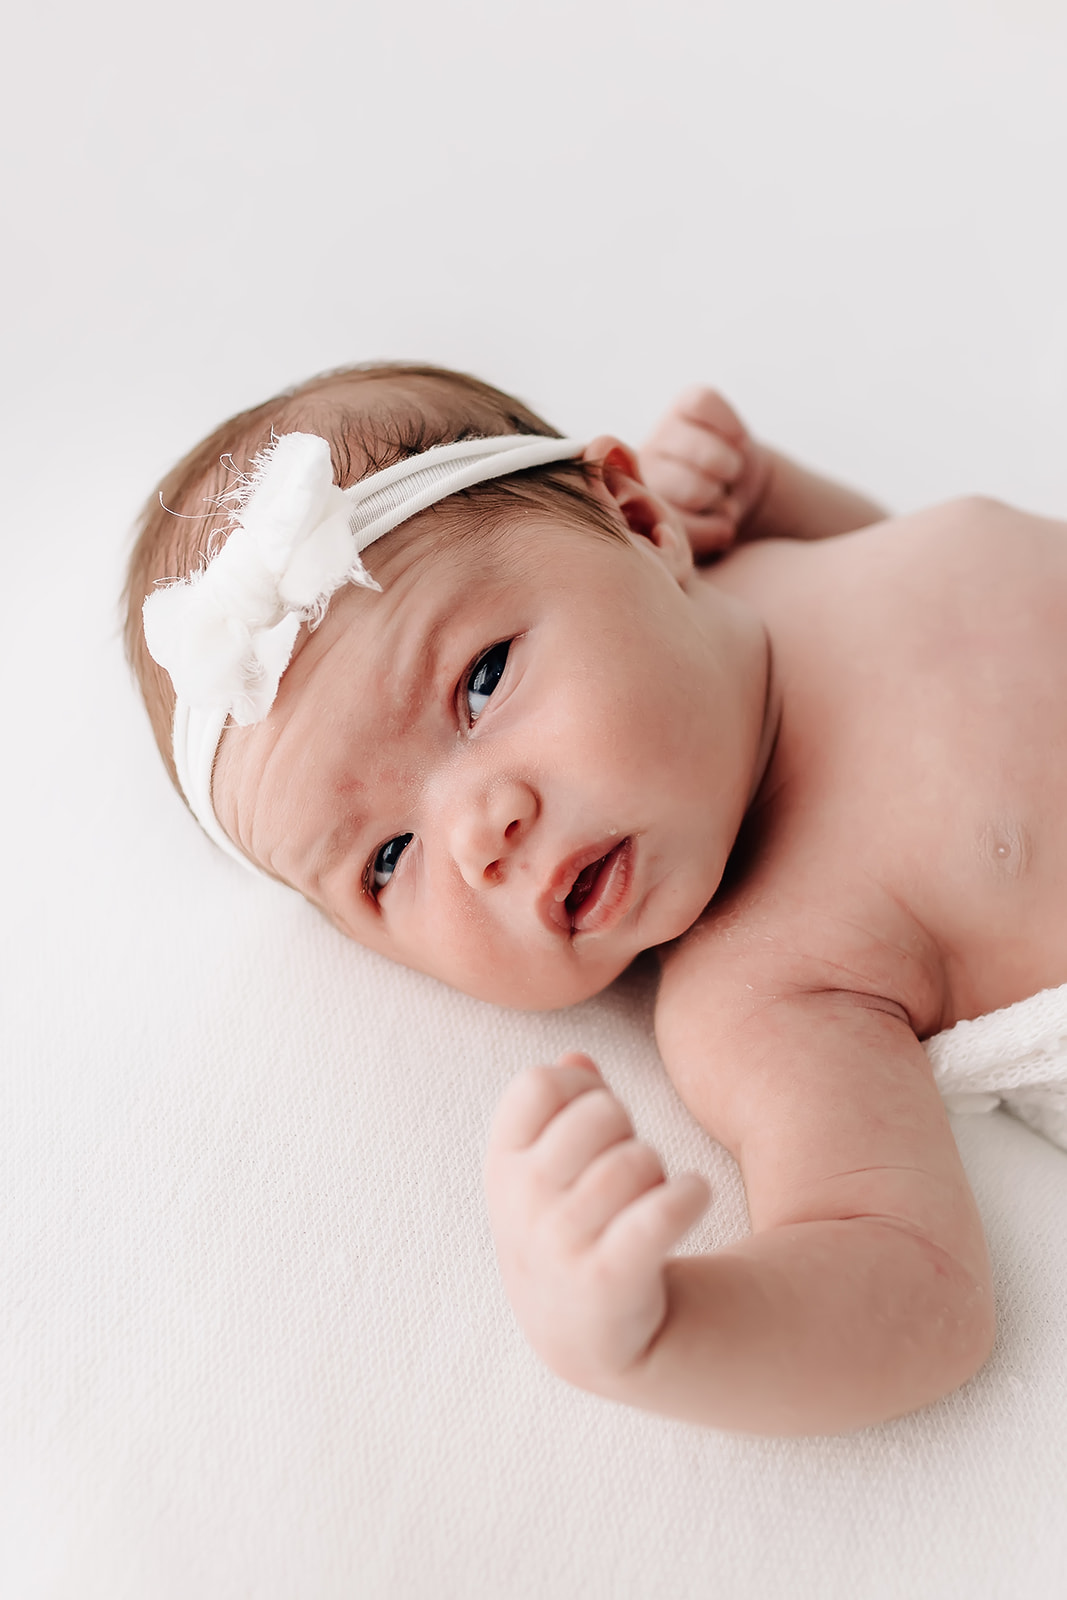 A newborn baby lays on a white bed with a white headband bow with eyes open